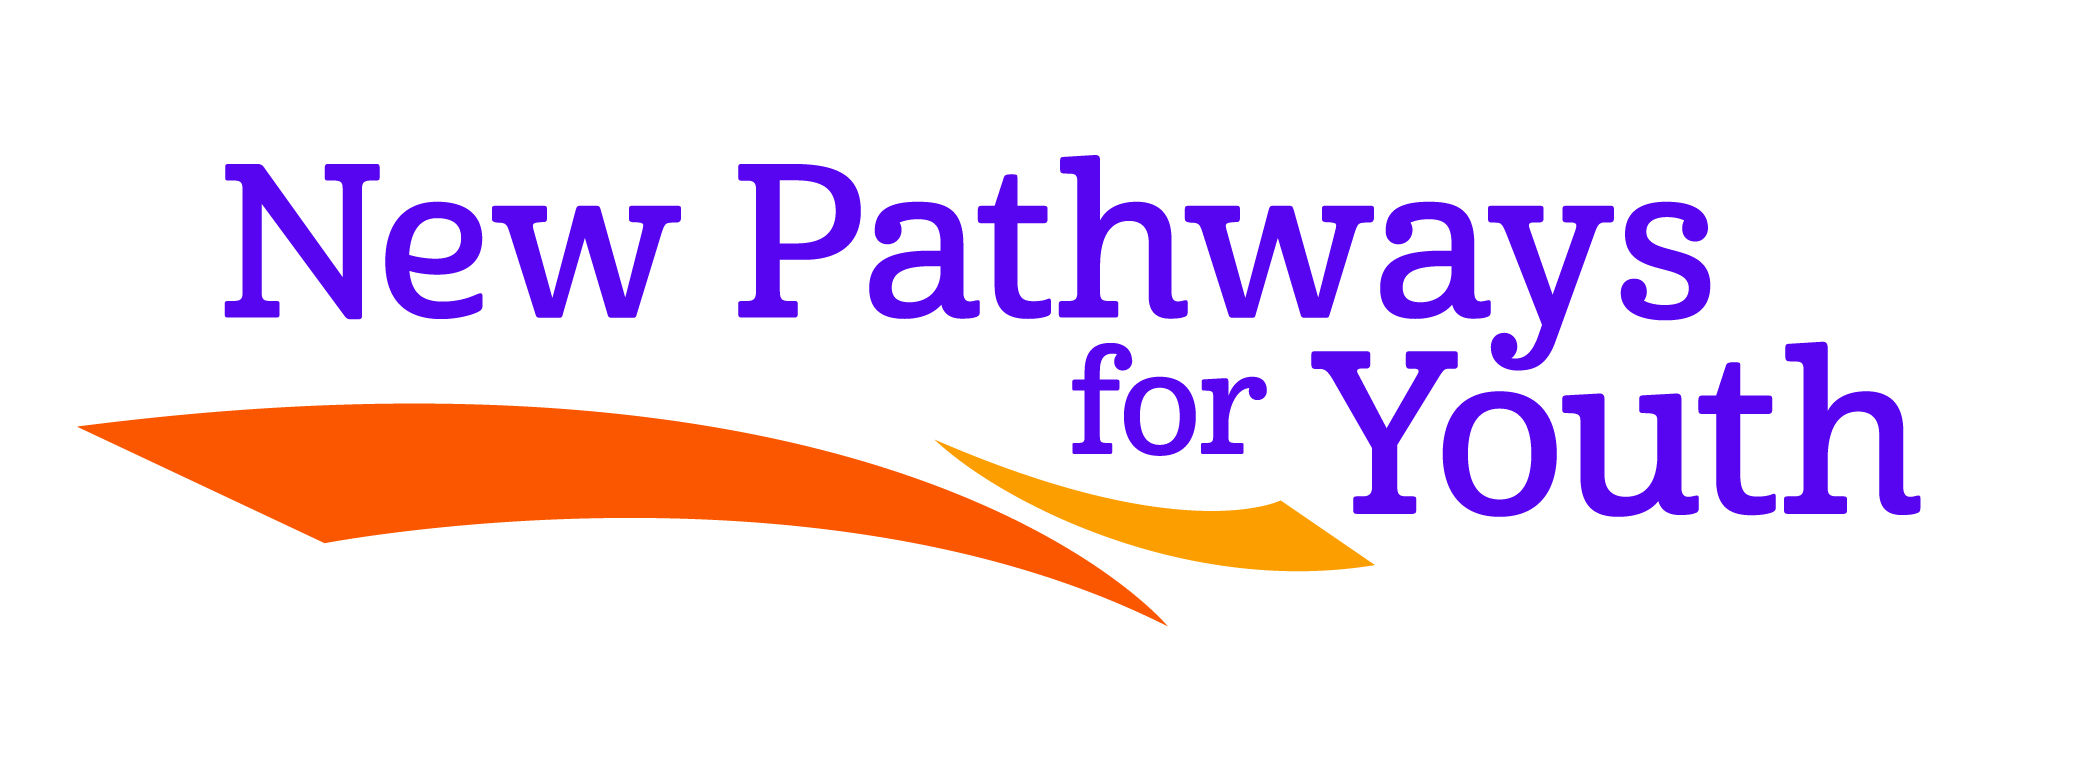 New Pathways for Youth